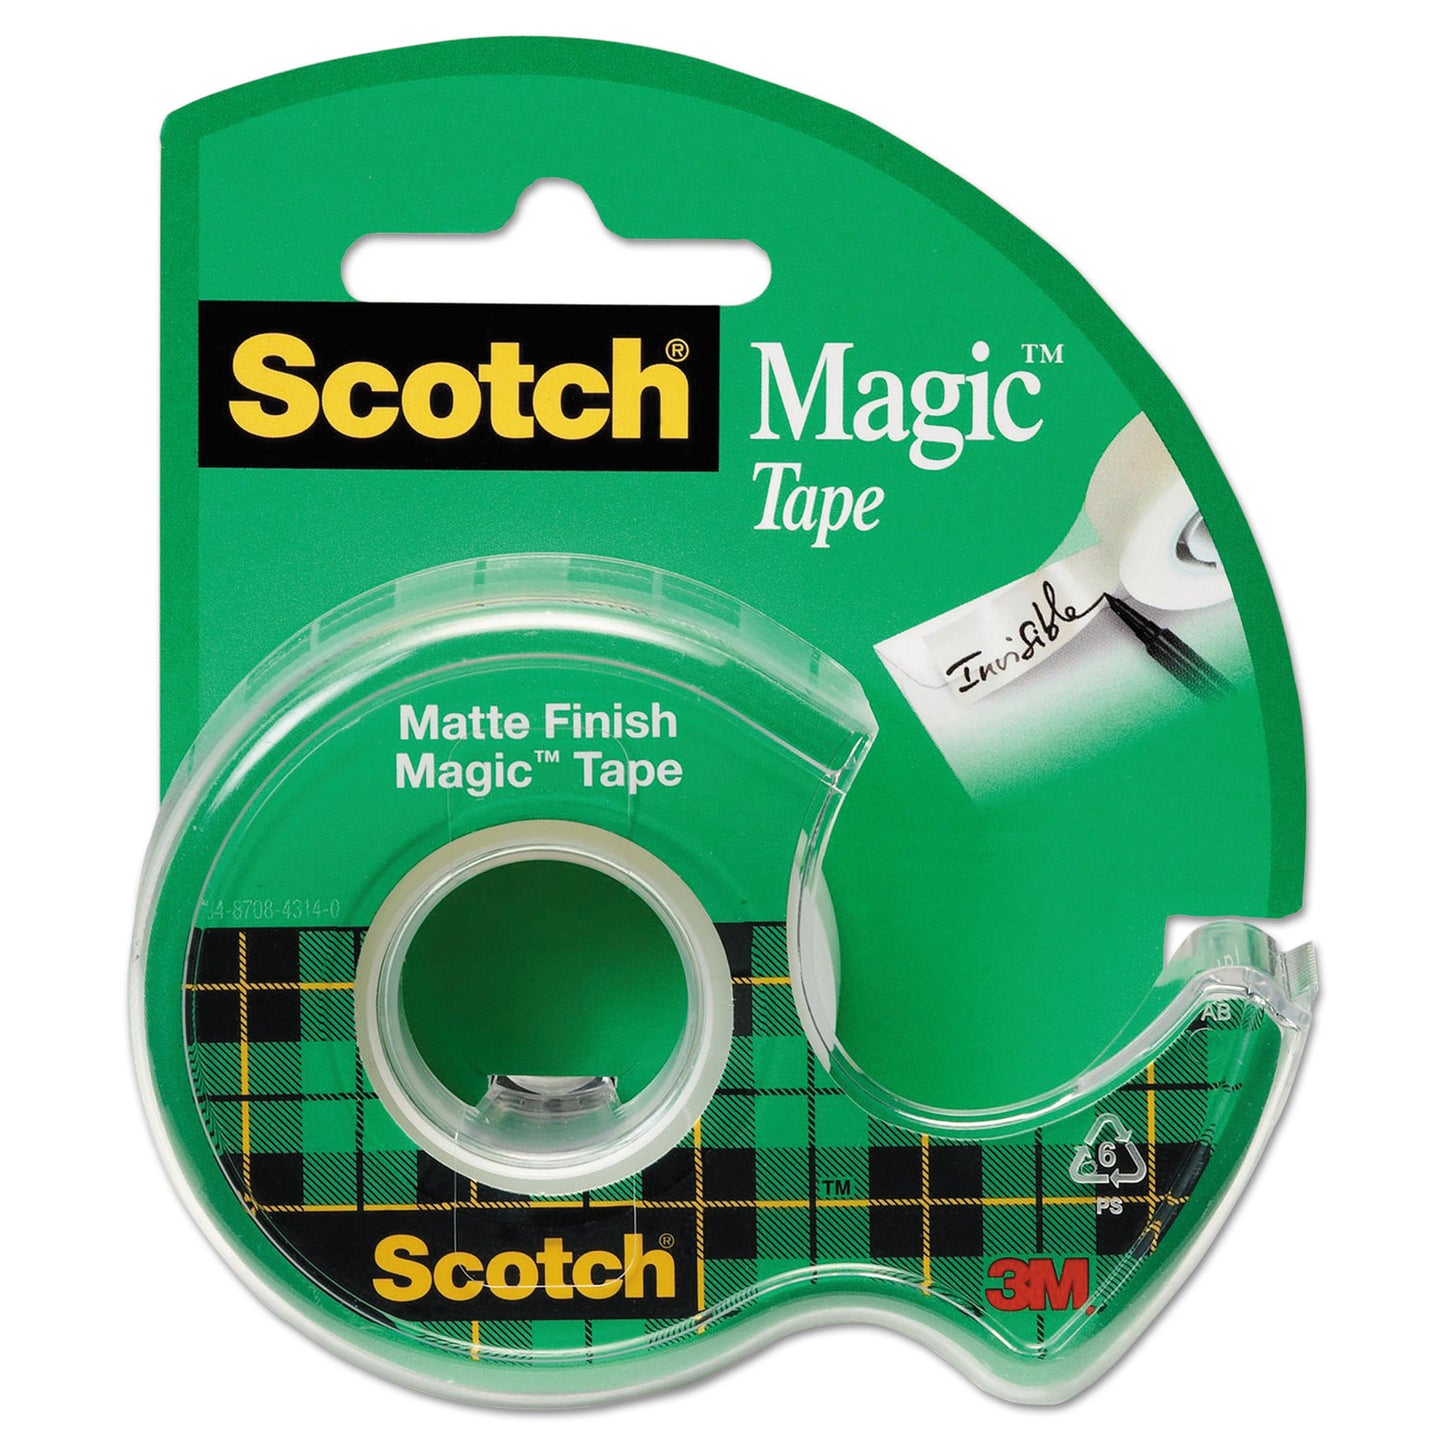 Scotch Magic Tape in Handheld Dispenser, 1 Inch Core, 0.75 inch x 25 ft, Clear Roll smoothly, Cuts Easily